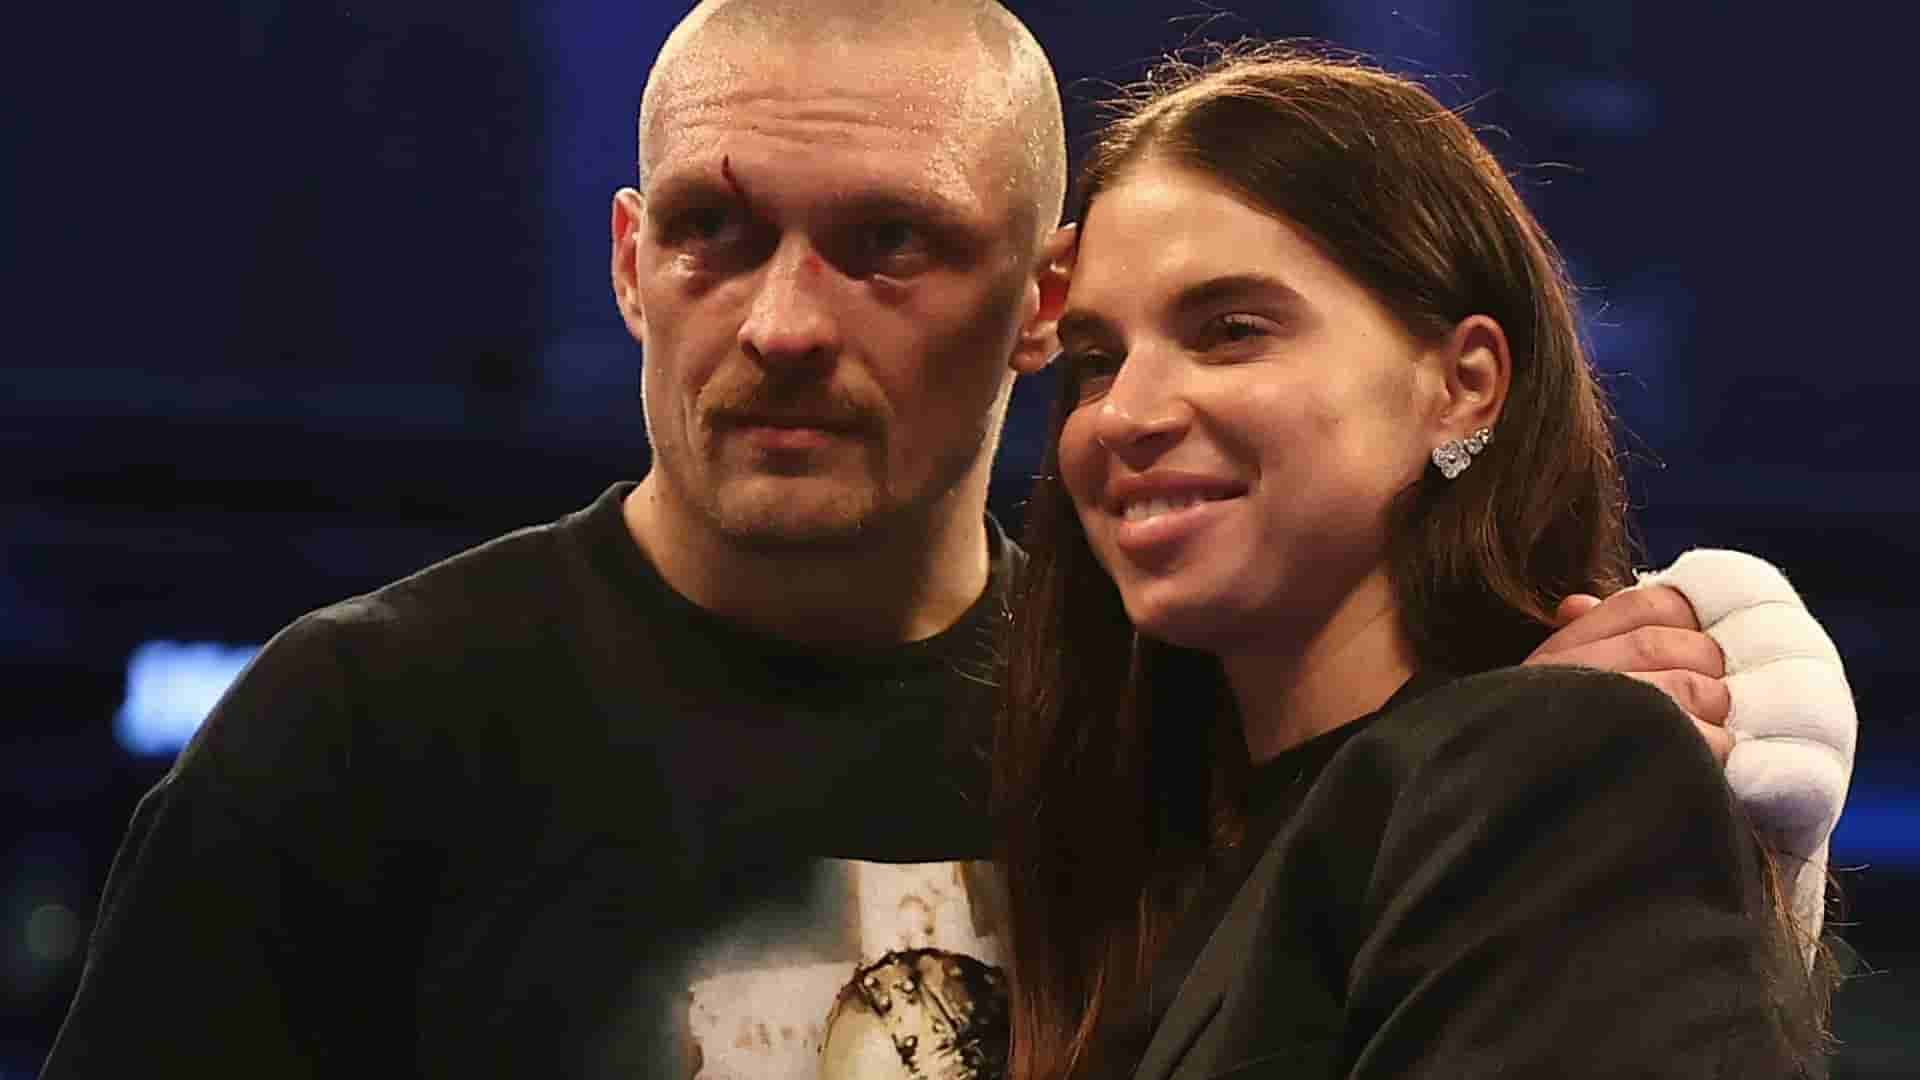 Oleksandr Usyk sacrificed his daughter's birth for the postponed bout training